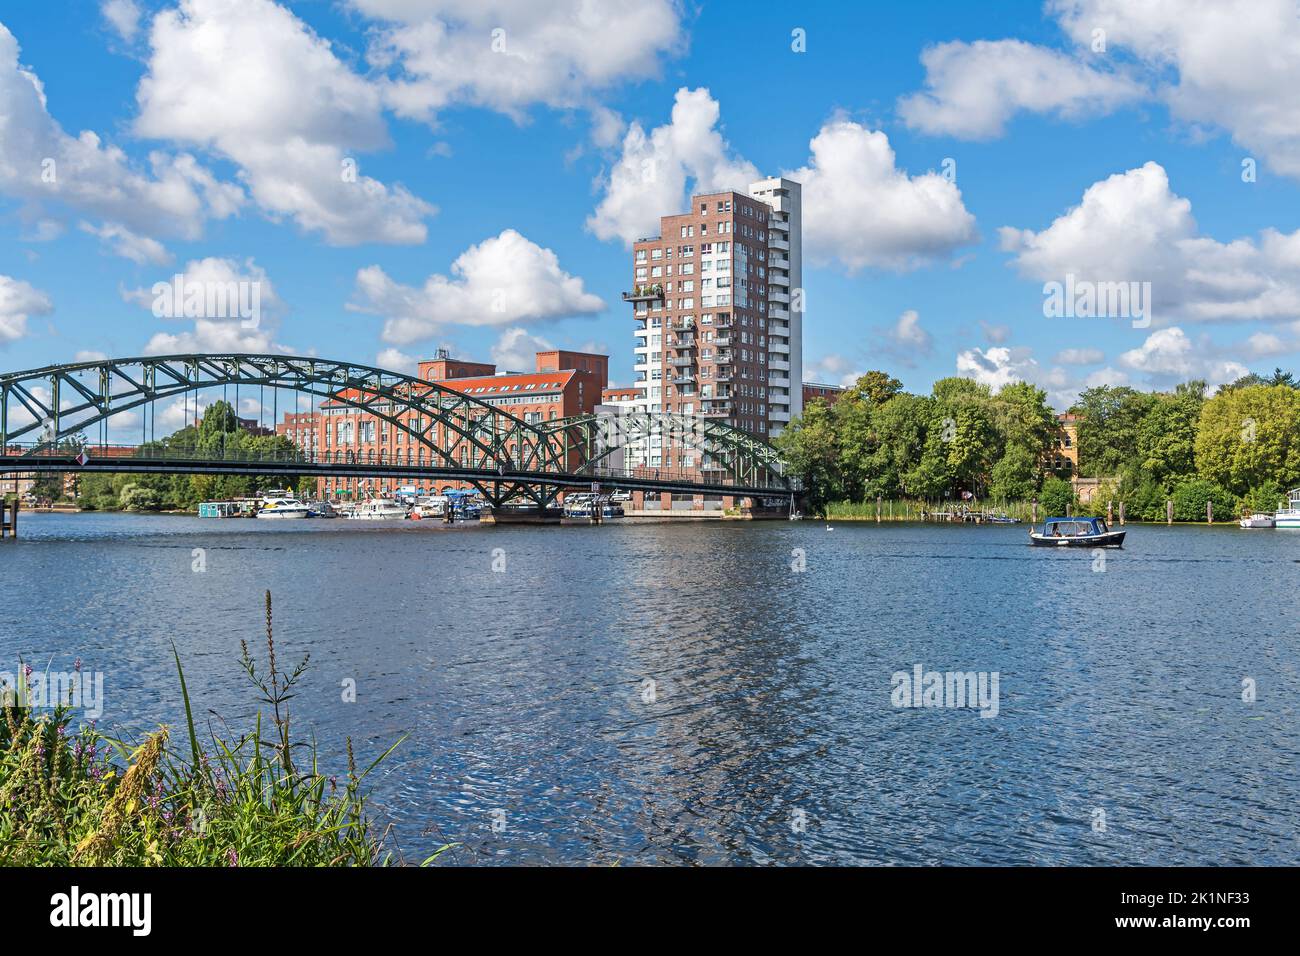 Berlin, Germany - August 6, 2022: River Havel with its arch bridge Eiswerderbruecke, marina and residential buildings at the street Frieda Arnheim Pro Stock Photo